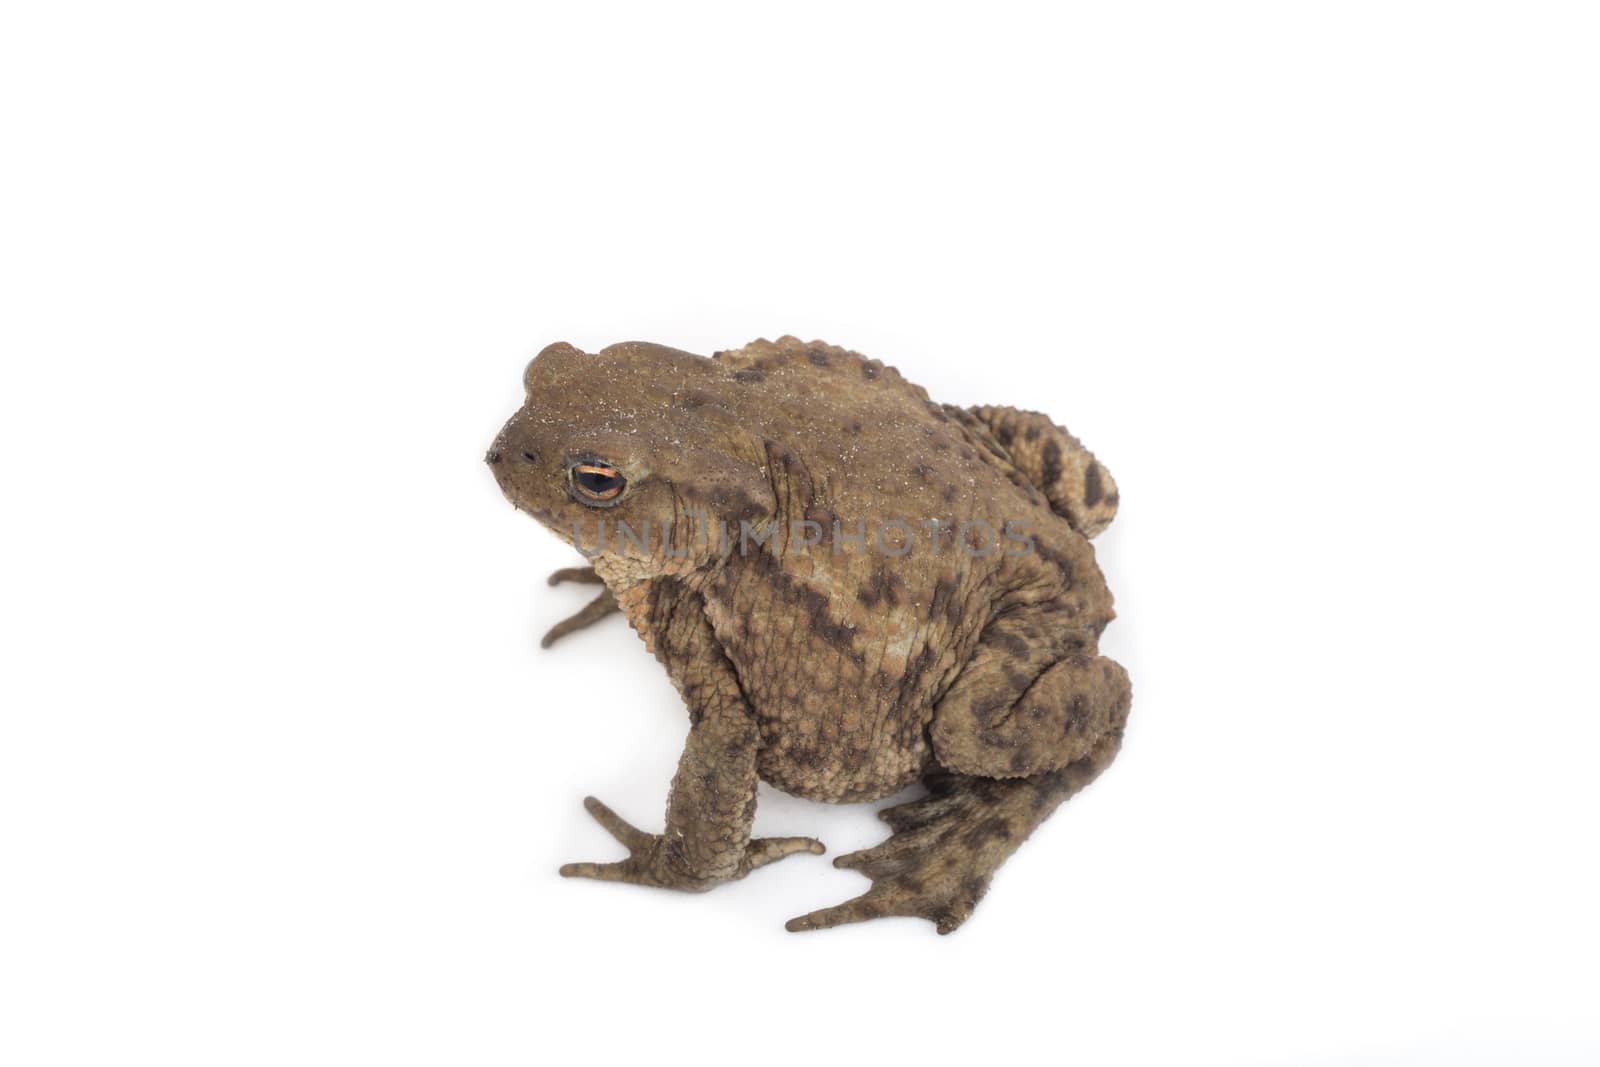 Hoptoad isolated on white background by avanheertum